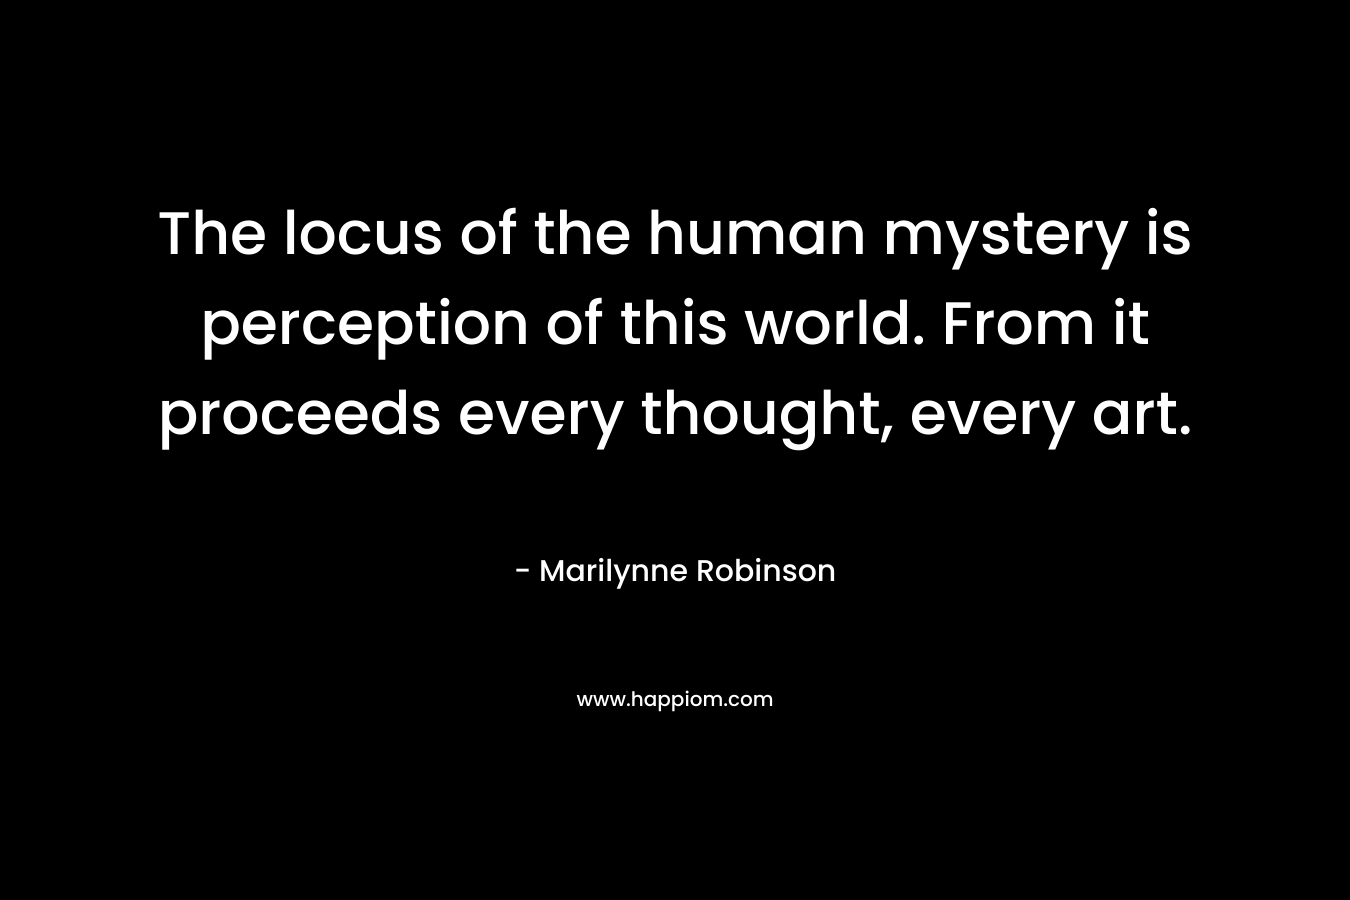 The locus of the human mystery is perception of this world. From it proceeds every thought, every art.